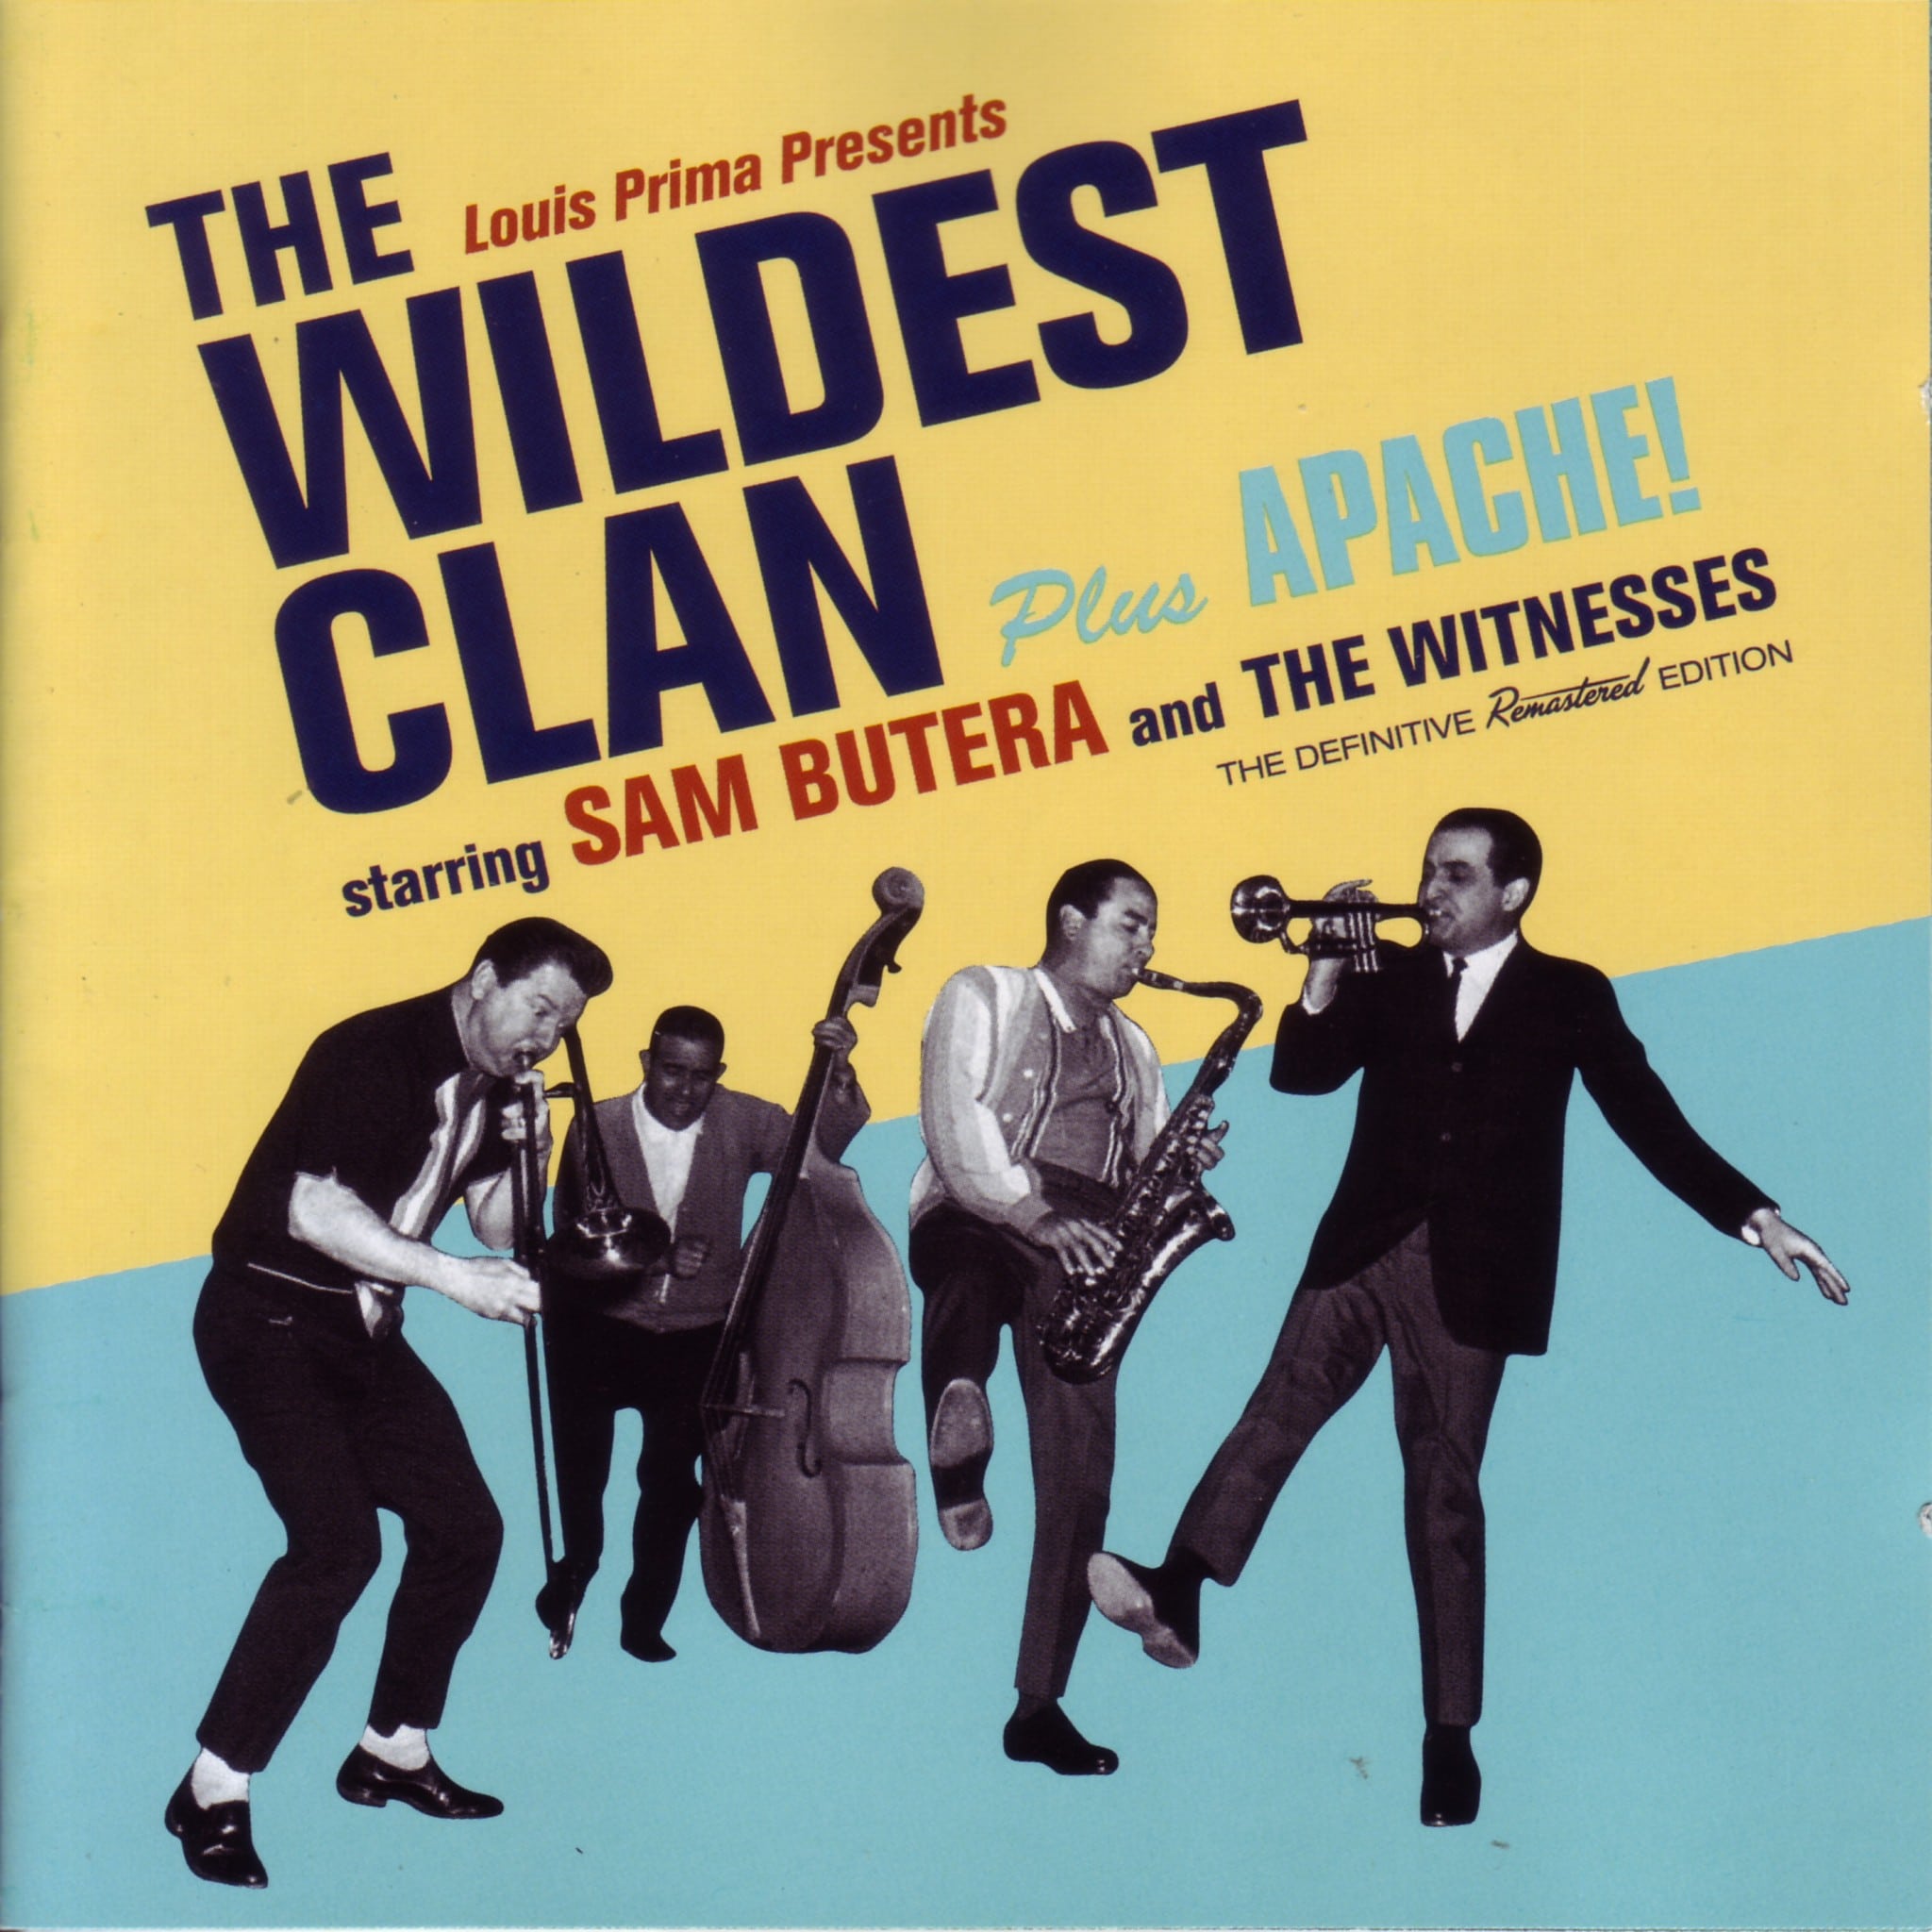 Sam Butara and the Witnesses: Louis Prima's wing man - The Audiophile Man